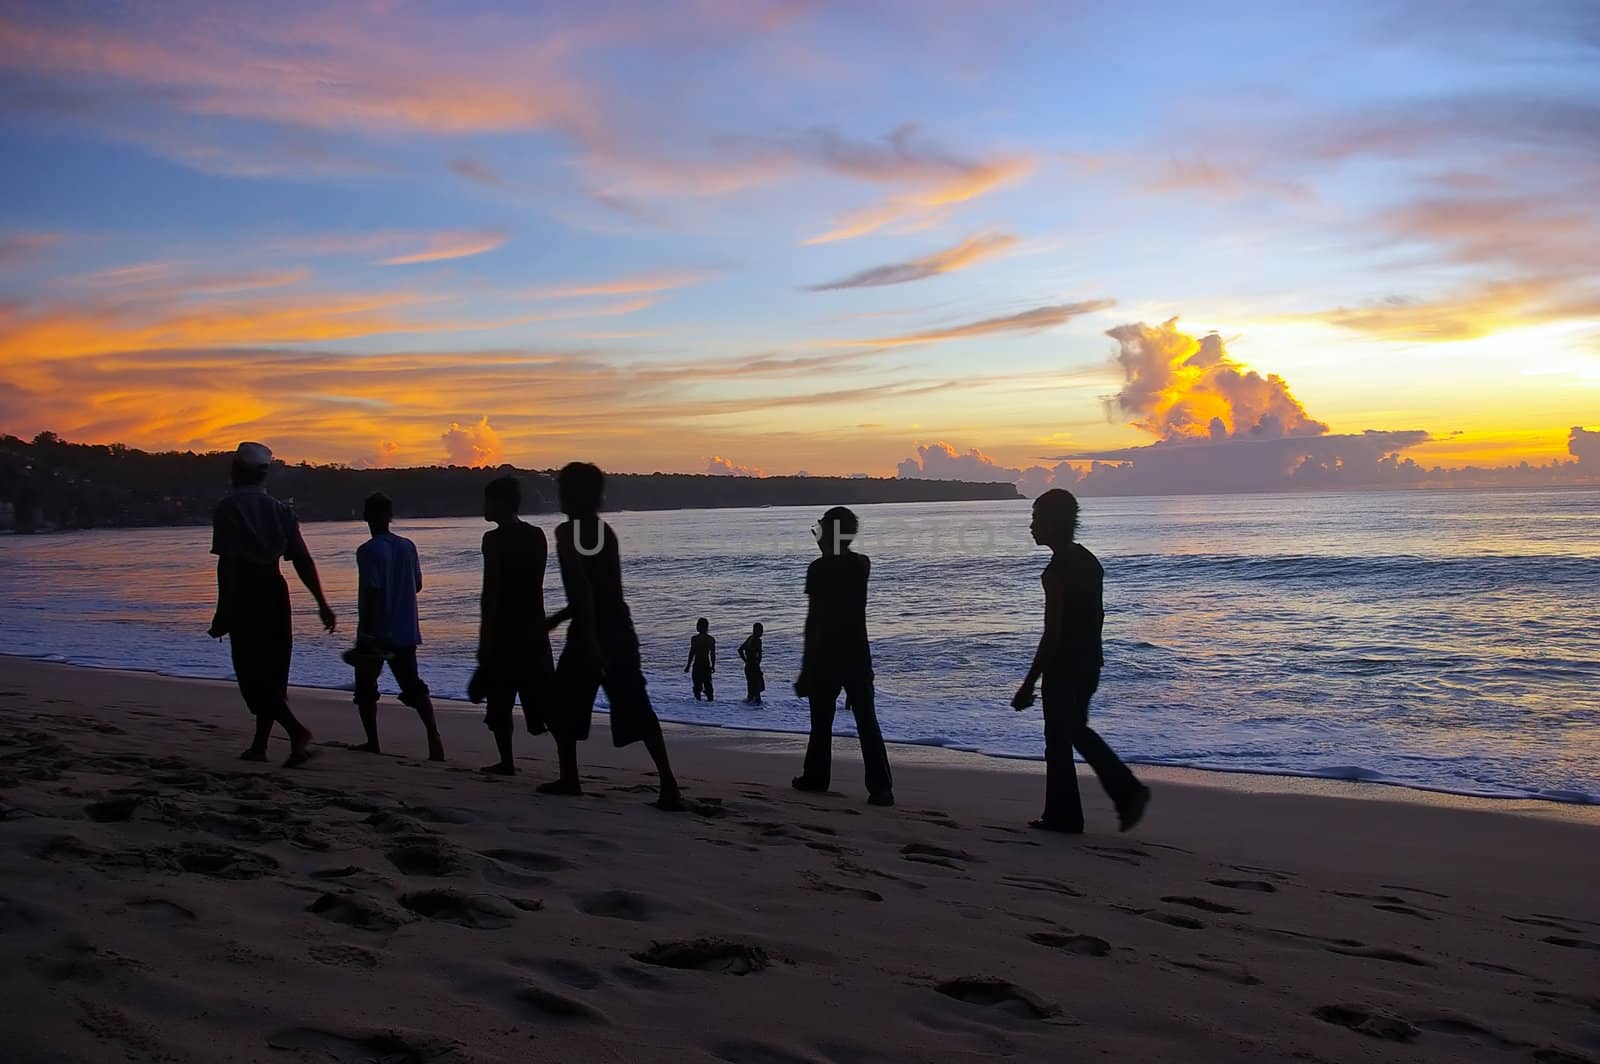 A group of Indonesian day trippers heading home at sunset, Dreamland, Bali, Indonesia.